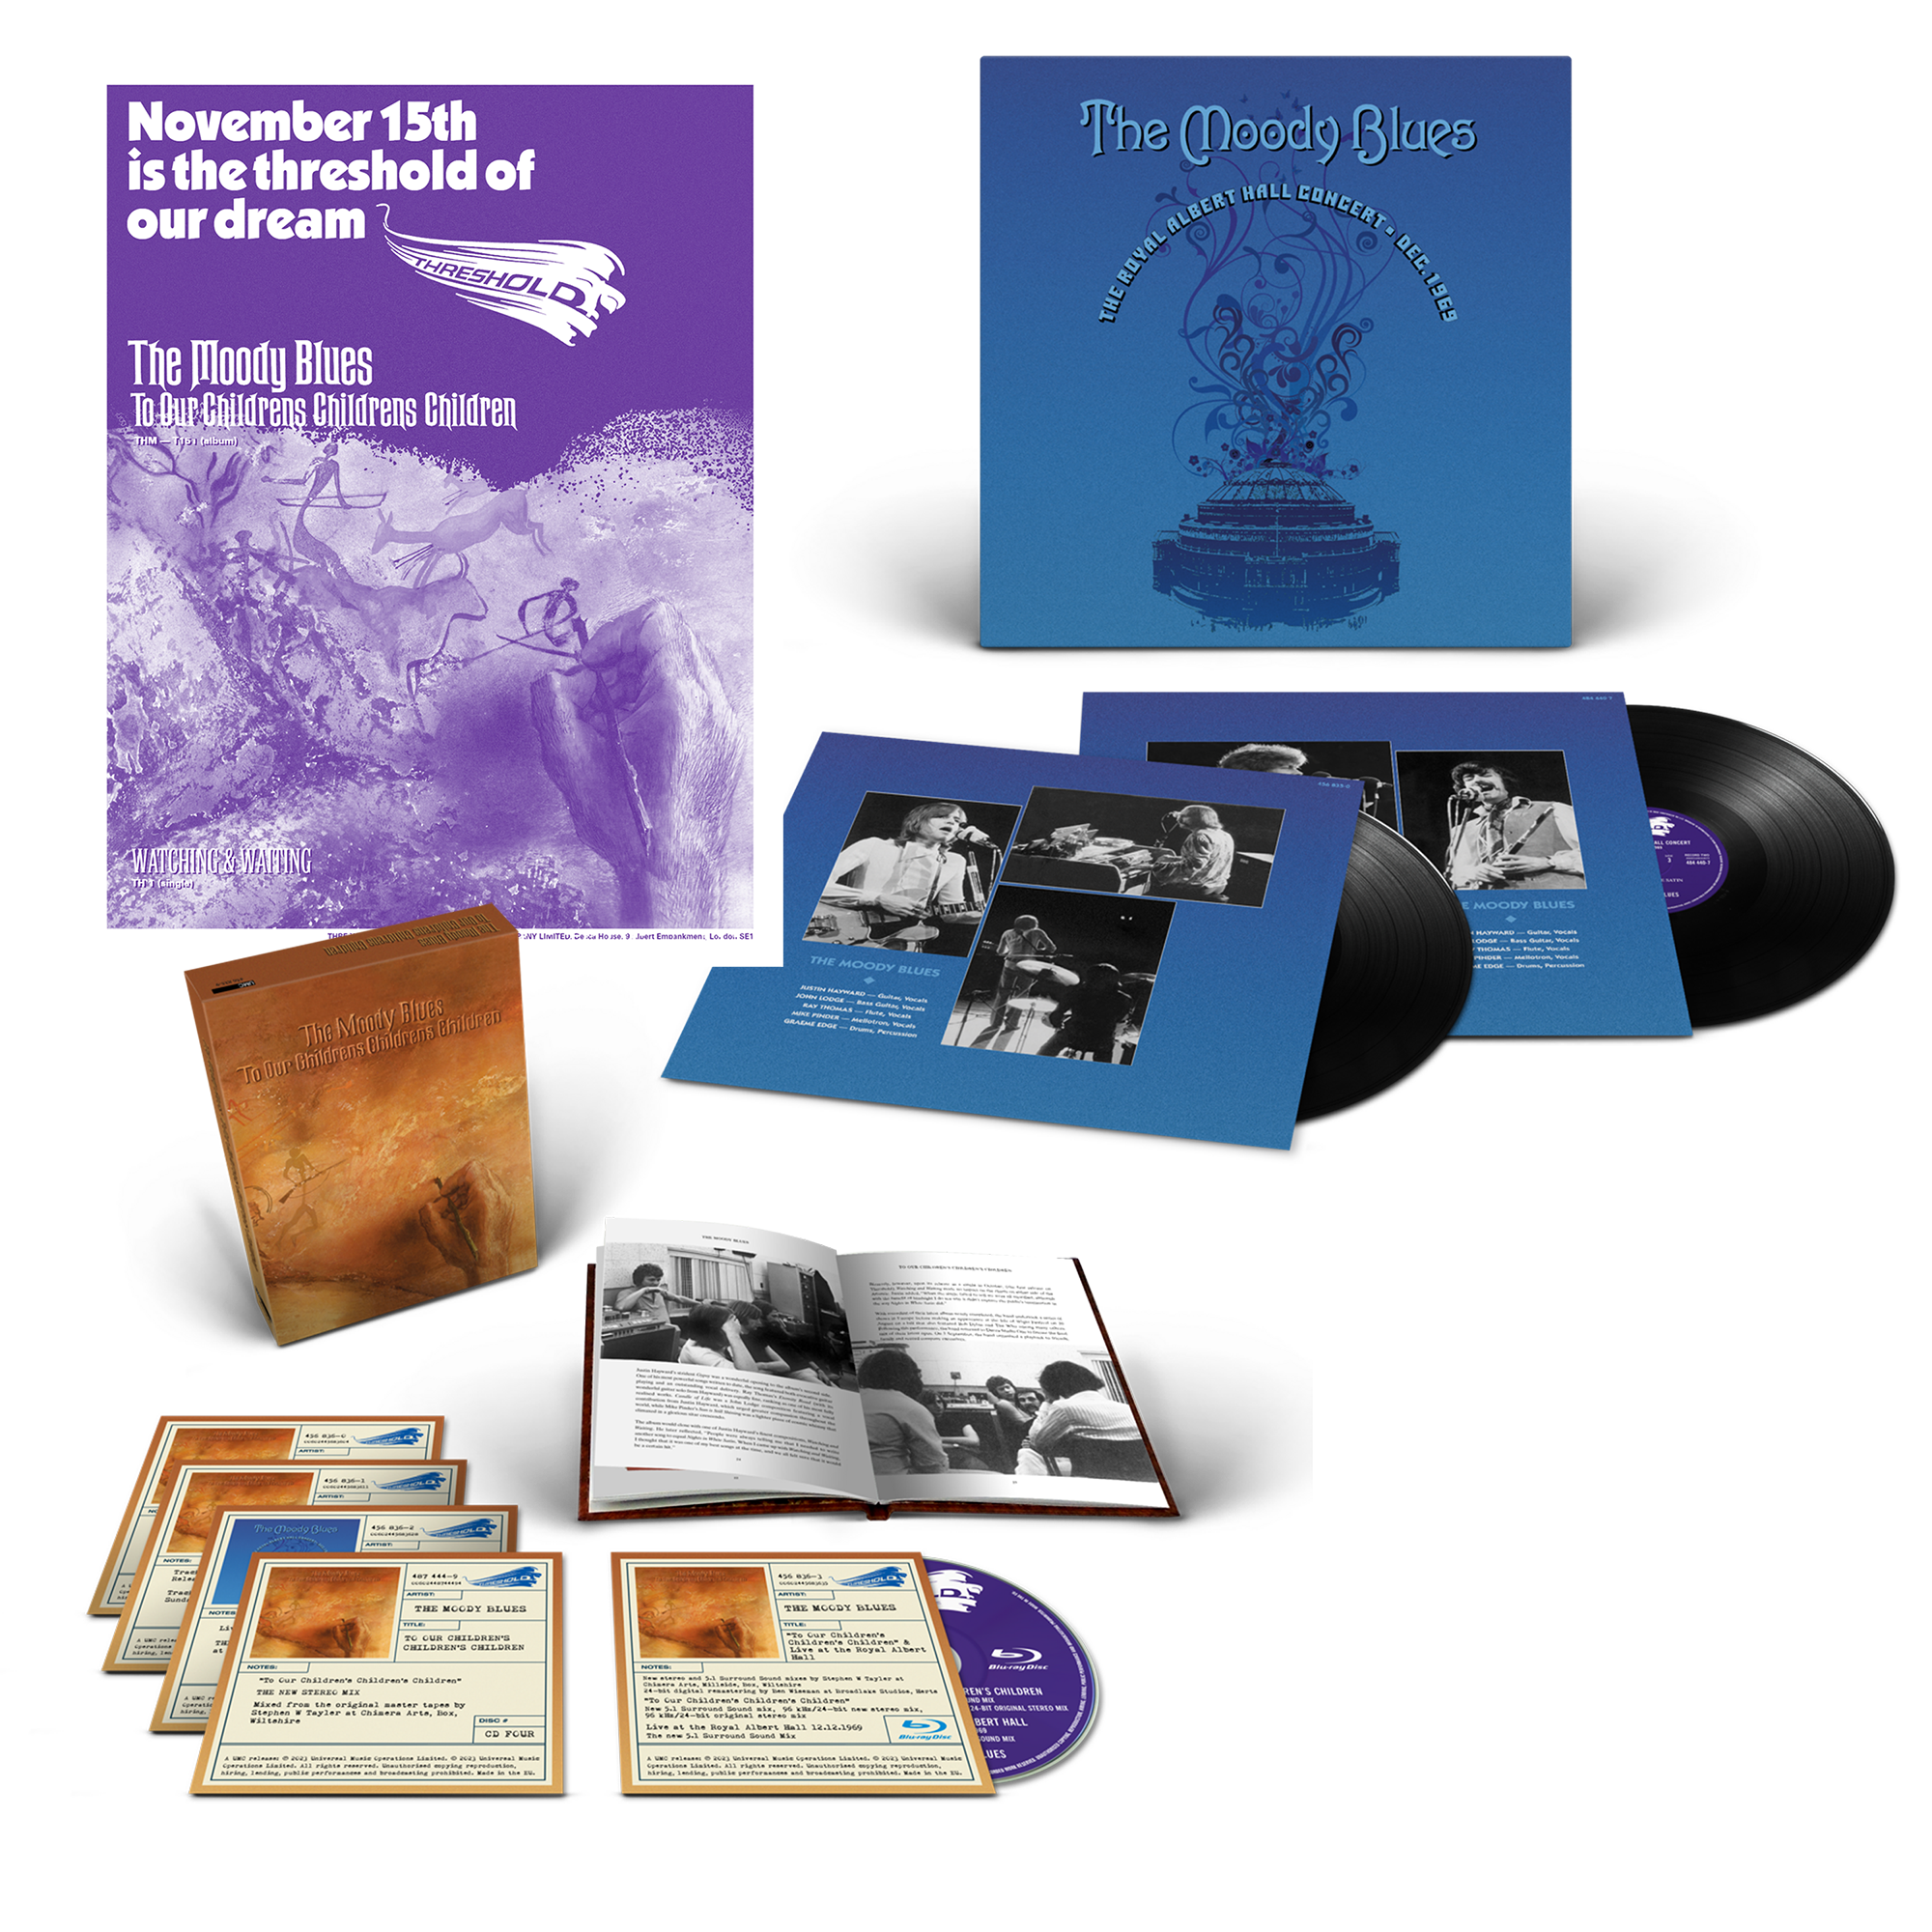 The Royal Albert Hall Concert December 1969 (LP + 12") + To Our Children’s Children’s Children 50th Anniversary Edition (4CD + BluRay) and Free Print Bundle